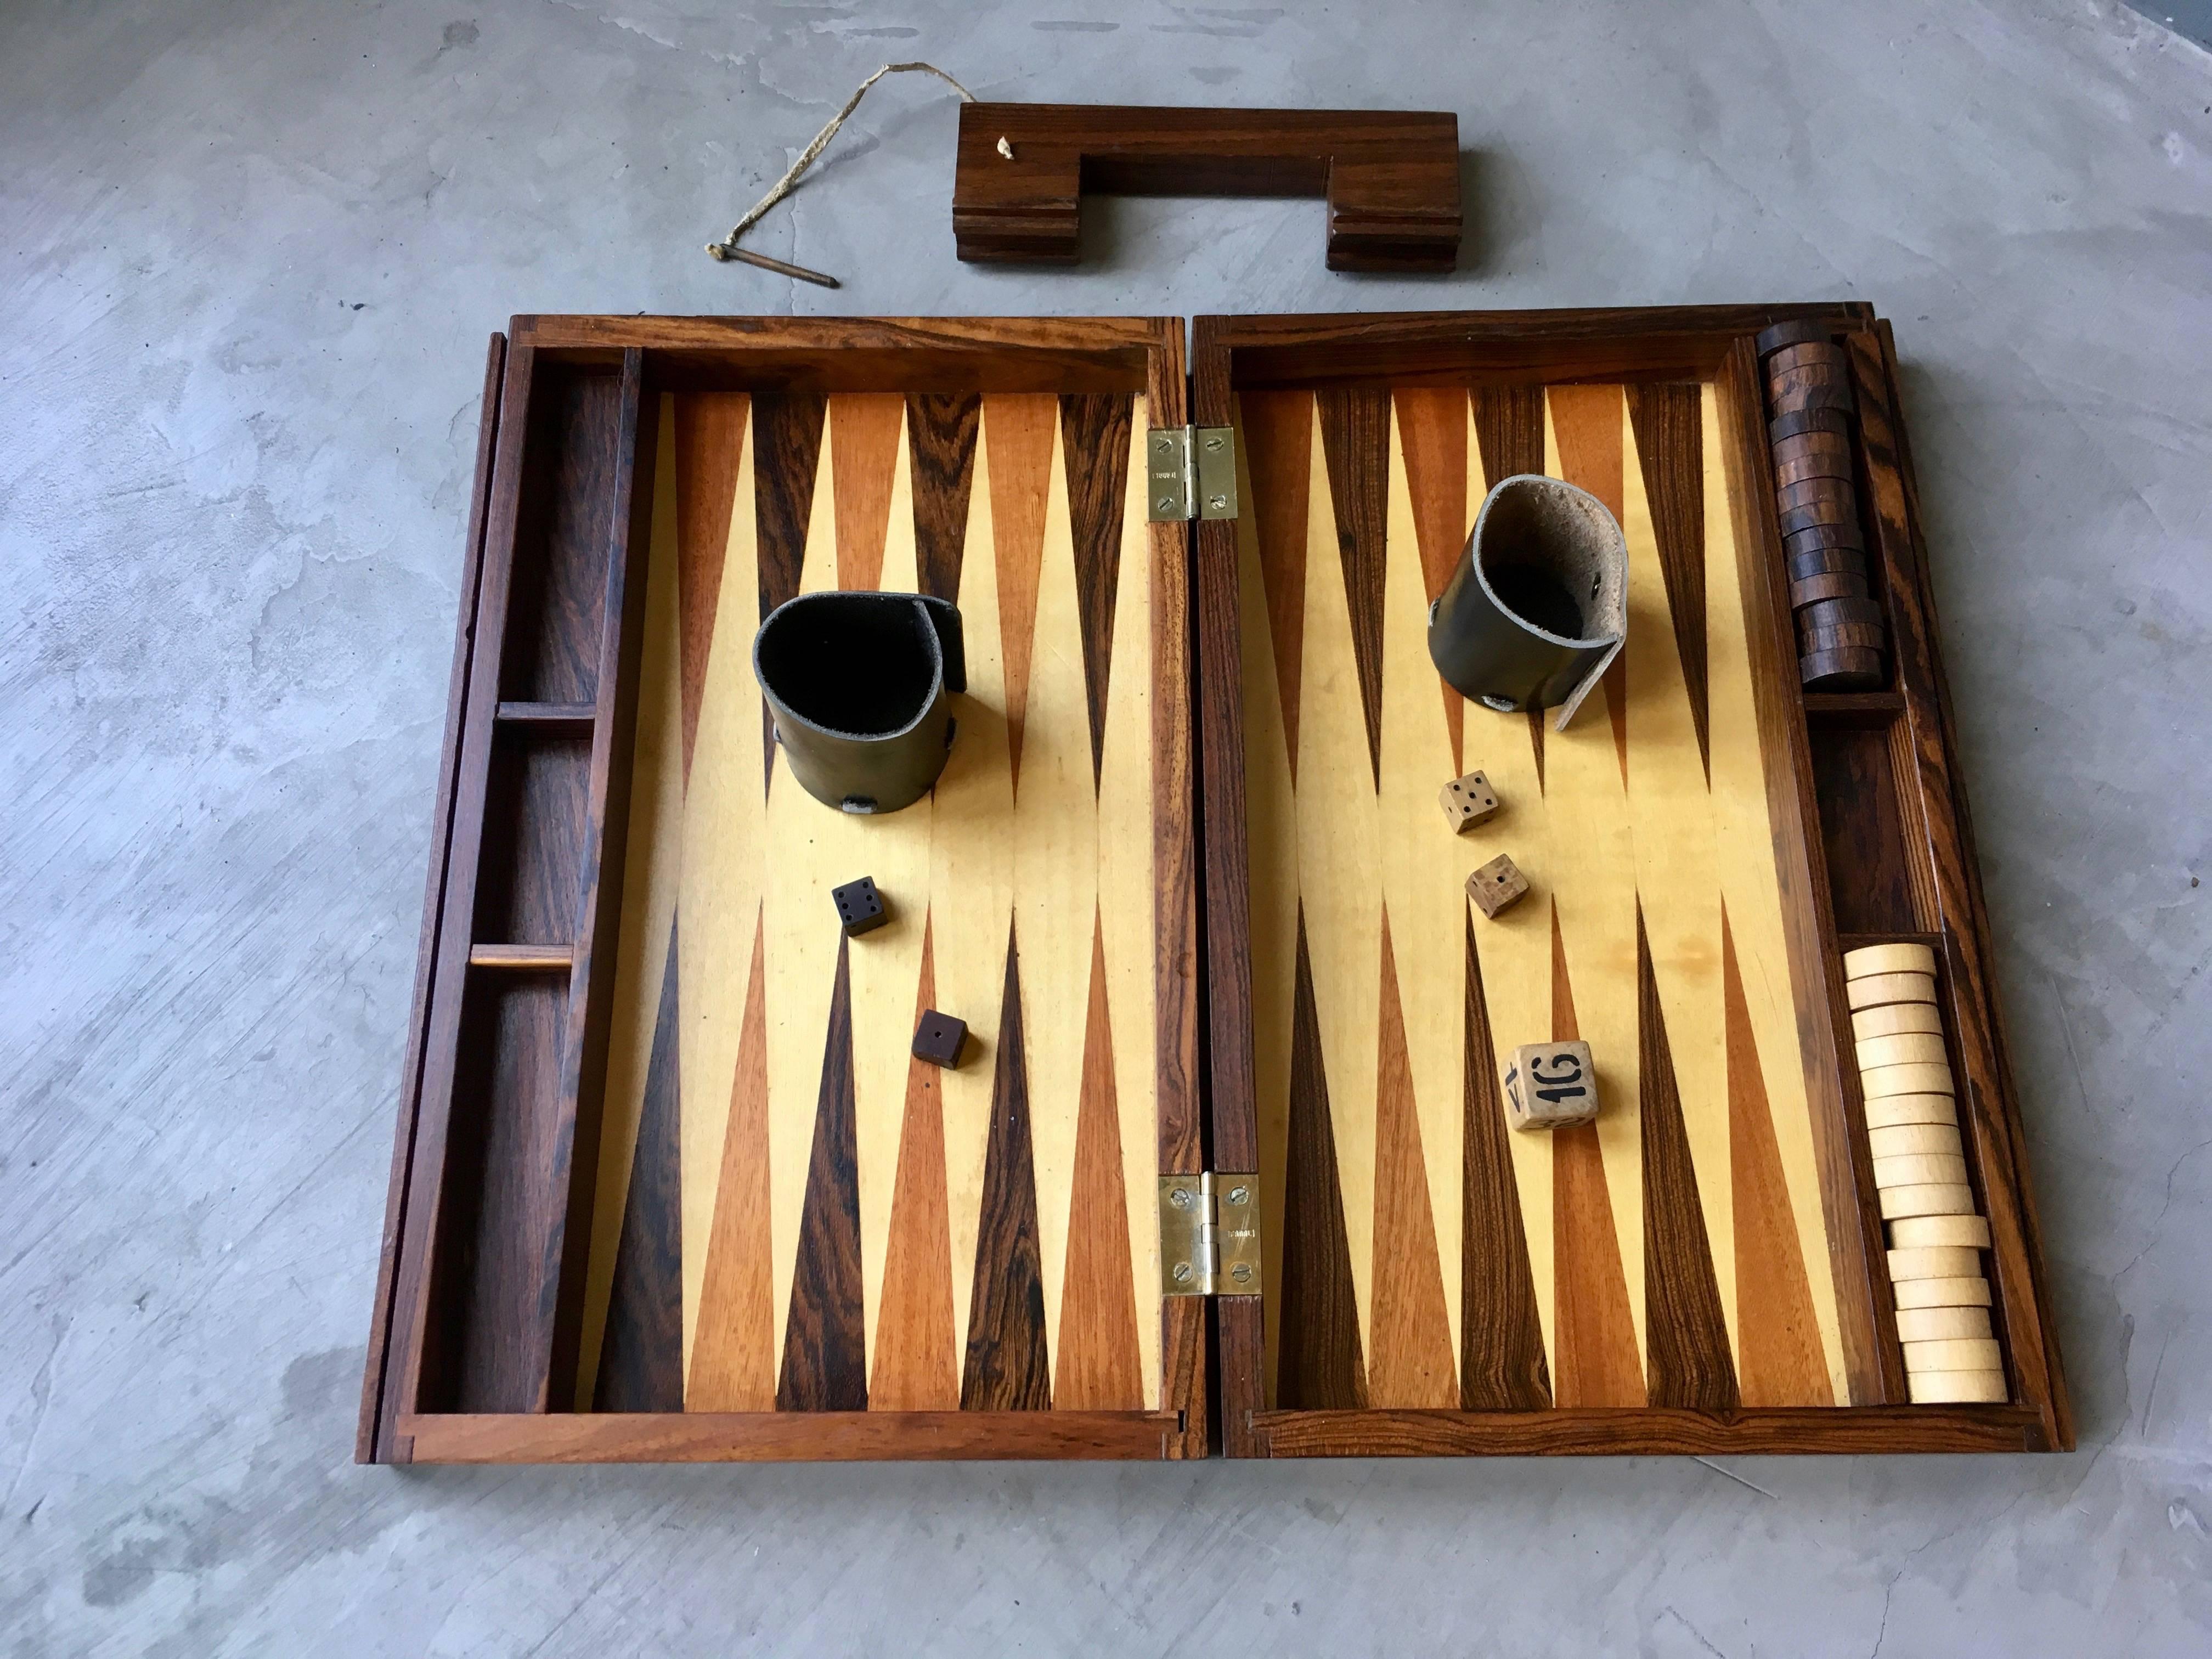 Stunning rosewood portable backgammon board. Handle slides out with inset brass pin. Board includes all pips, dice, leather cup holders and doubling cube. Designed by Don Shoemaker. Gorgeous piece. Very good condition.